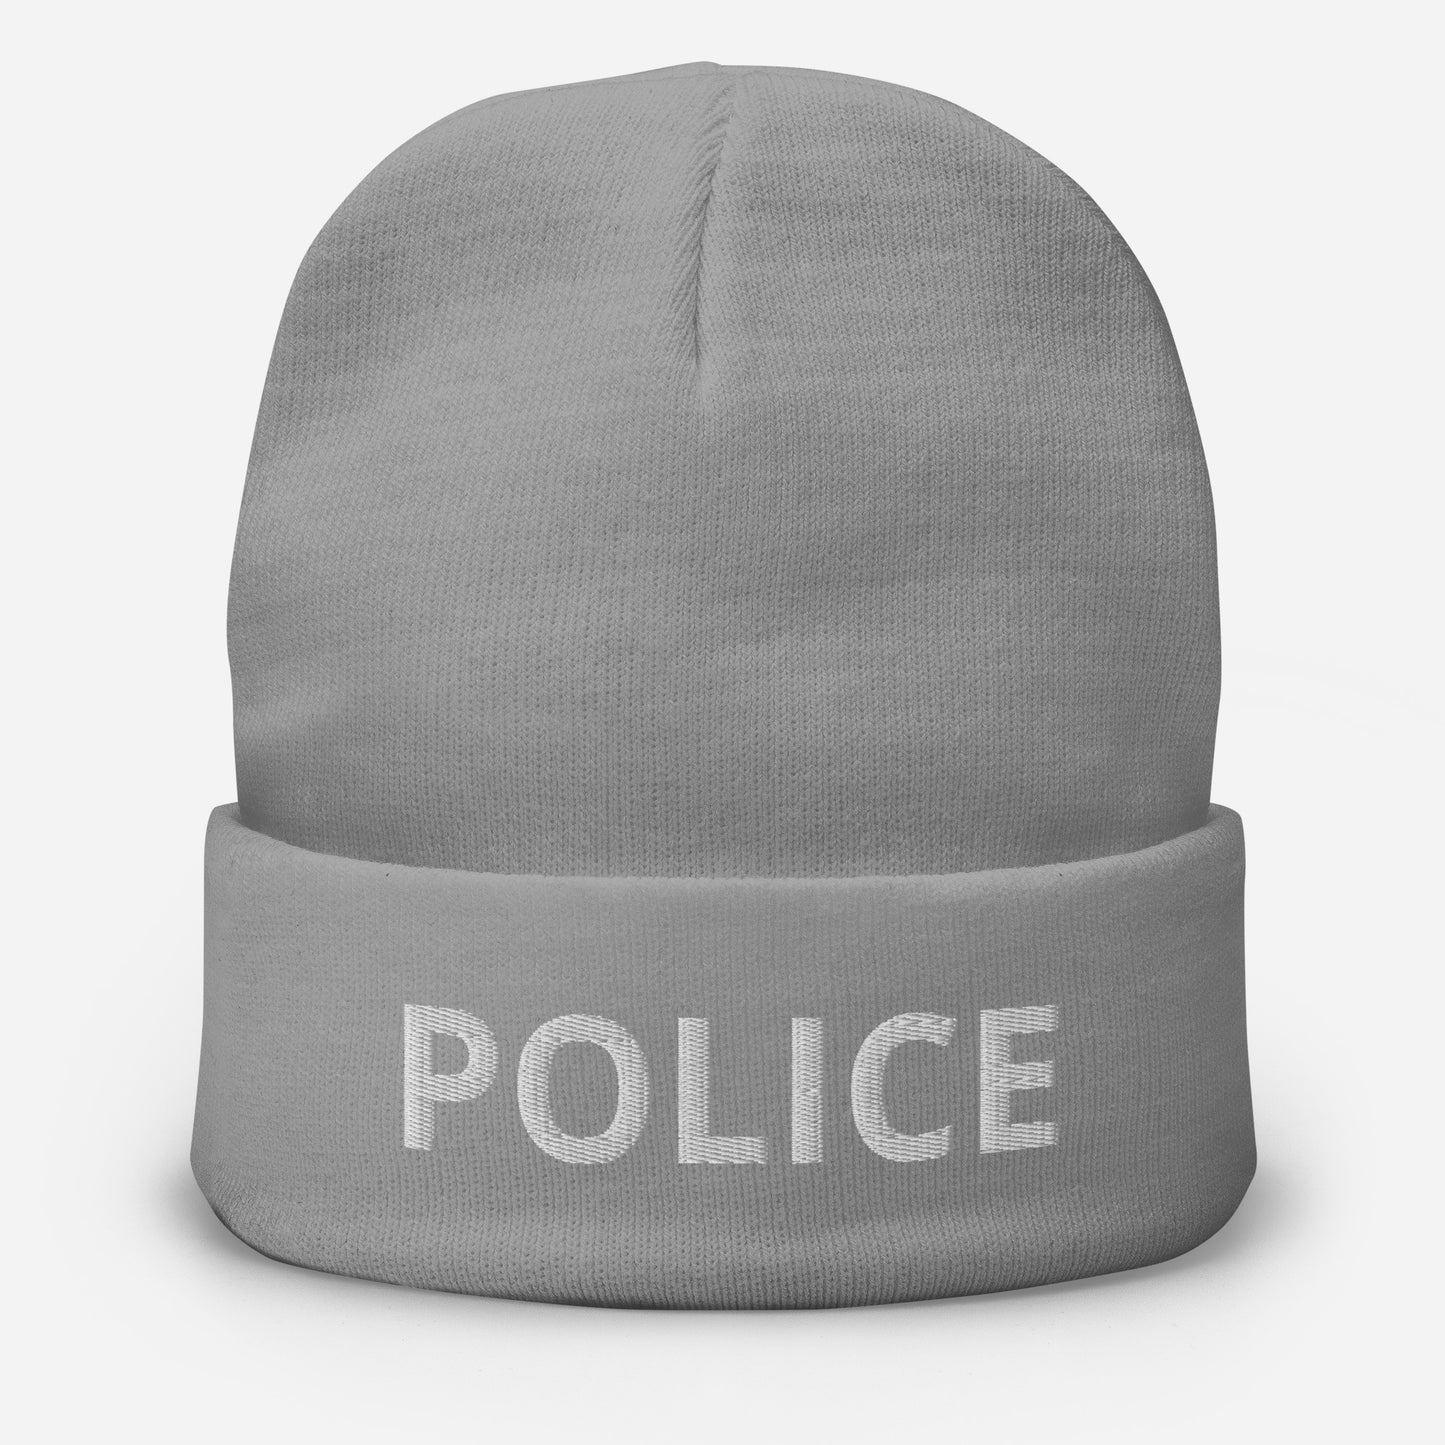 POLICE Embroidered Beanie